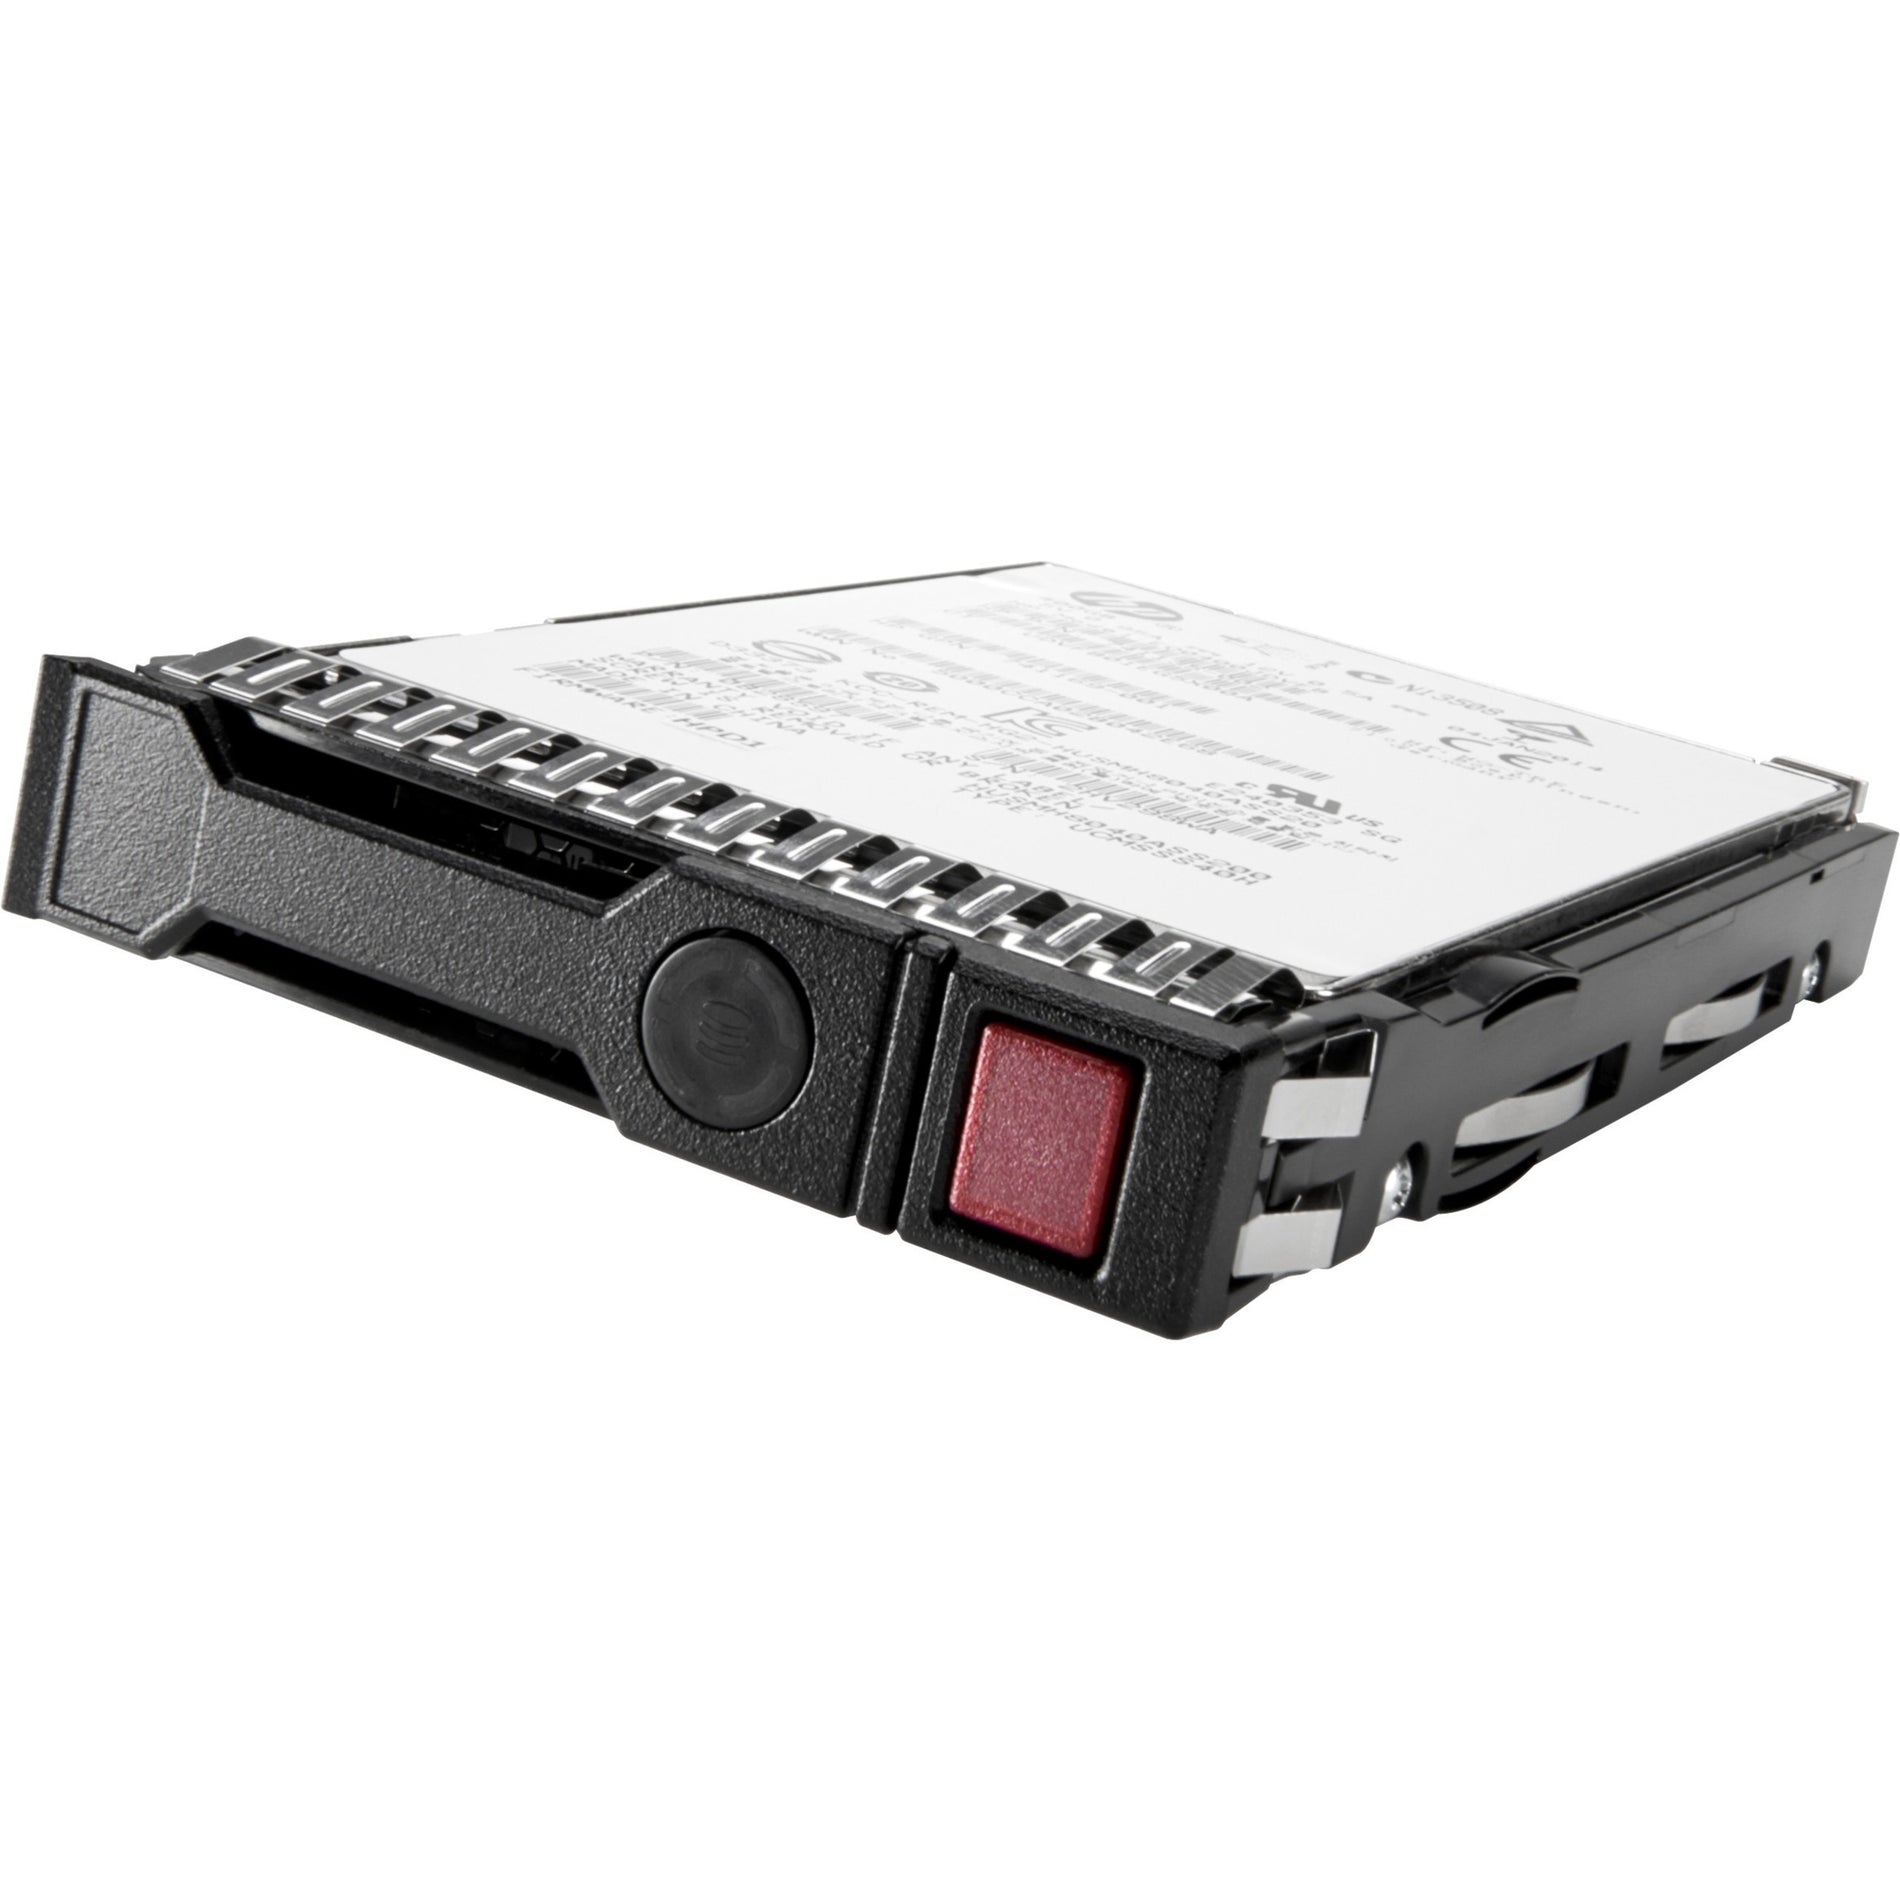 HPE N9X91A Solid State Drive 1.60 TB, High Performance Storage Solution [Discontinued]